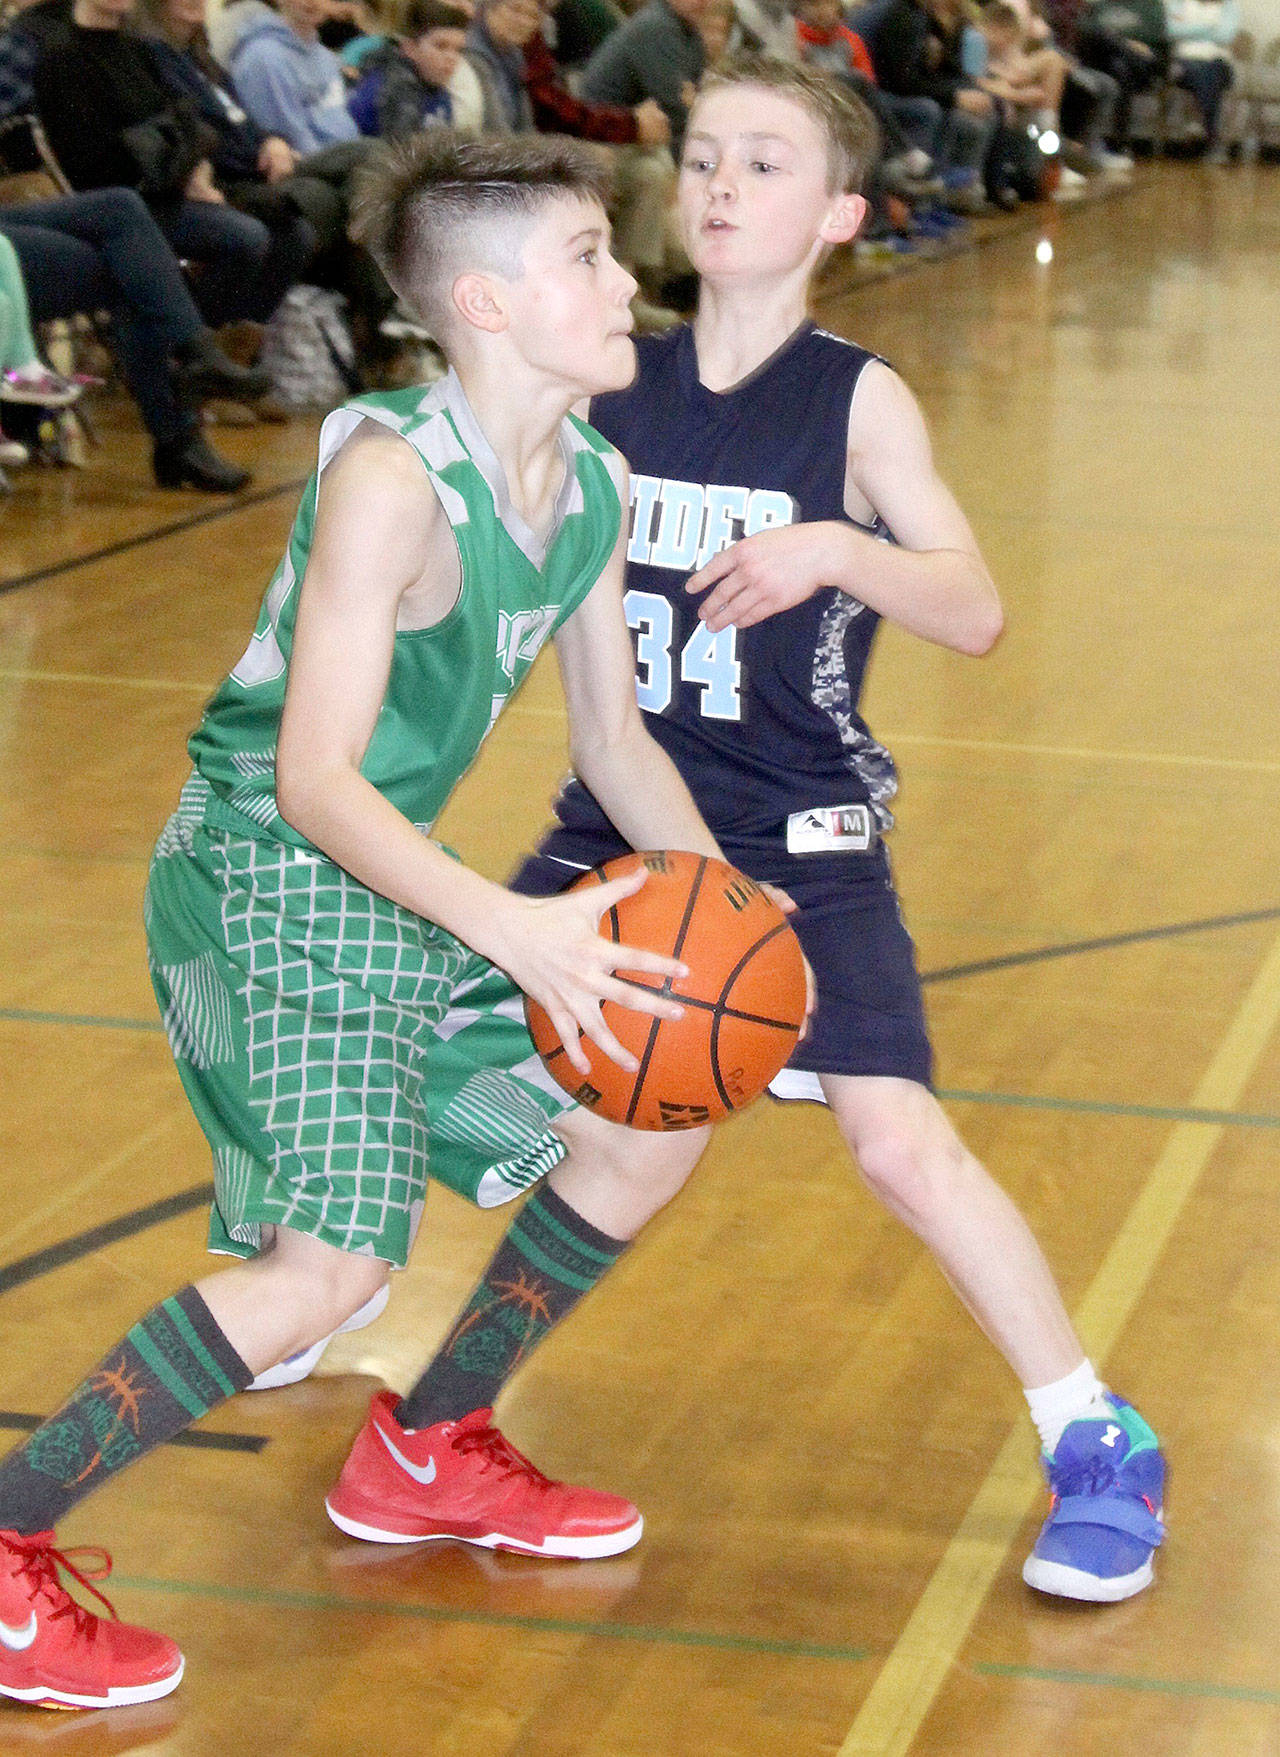 Alex Angevine of the Port Angeles sixth-grade boys team gets ready to shoot over the defense of the Gig Harbor Tides at this weekend’s Martin Luther King Jr. tournament in Port Angeles. Port Angeles went on to win the game Sunday 46-30. (Dave Logan/for Peninsula Daily News) )